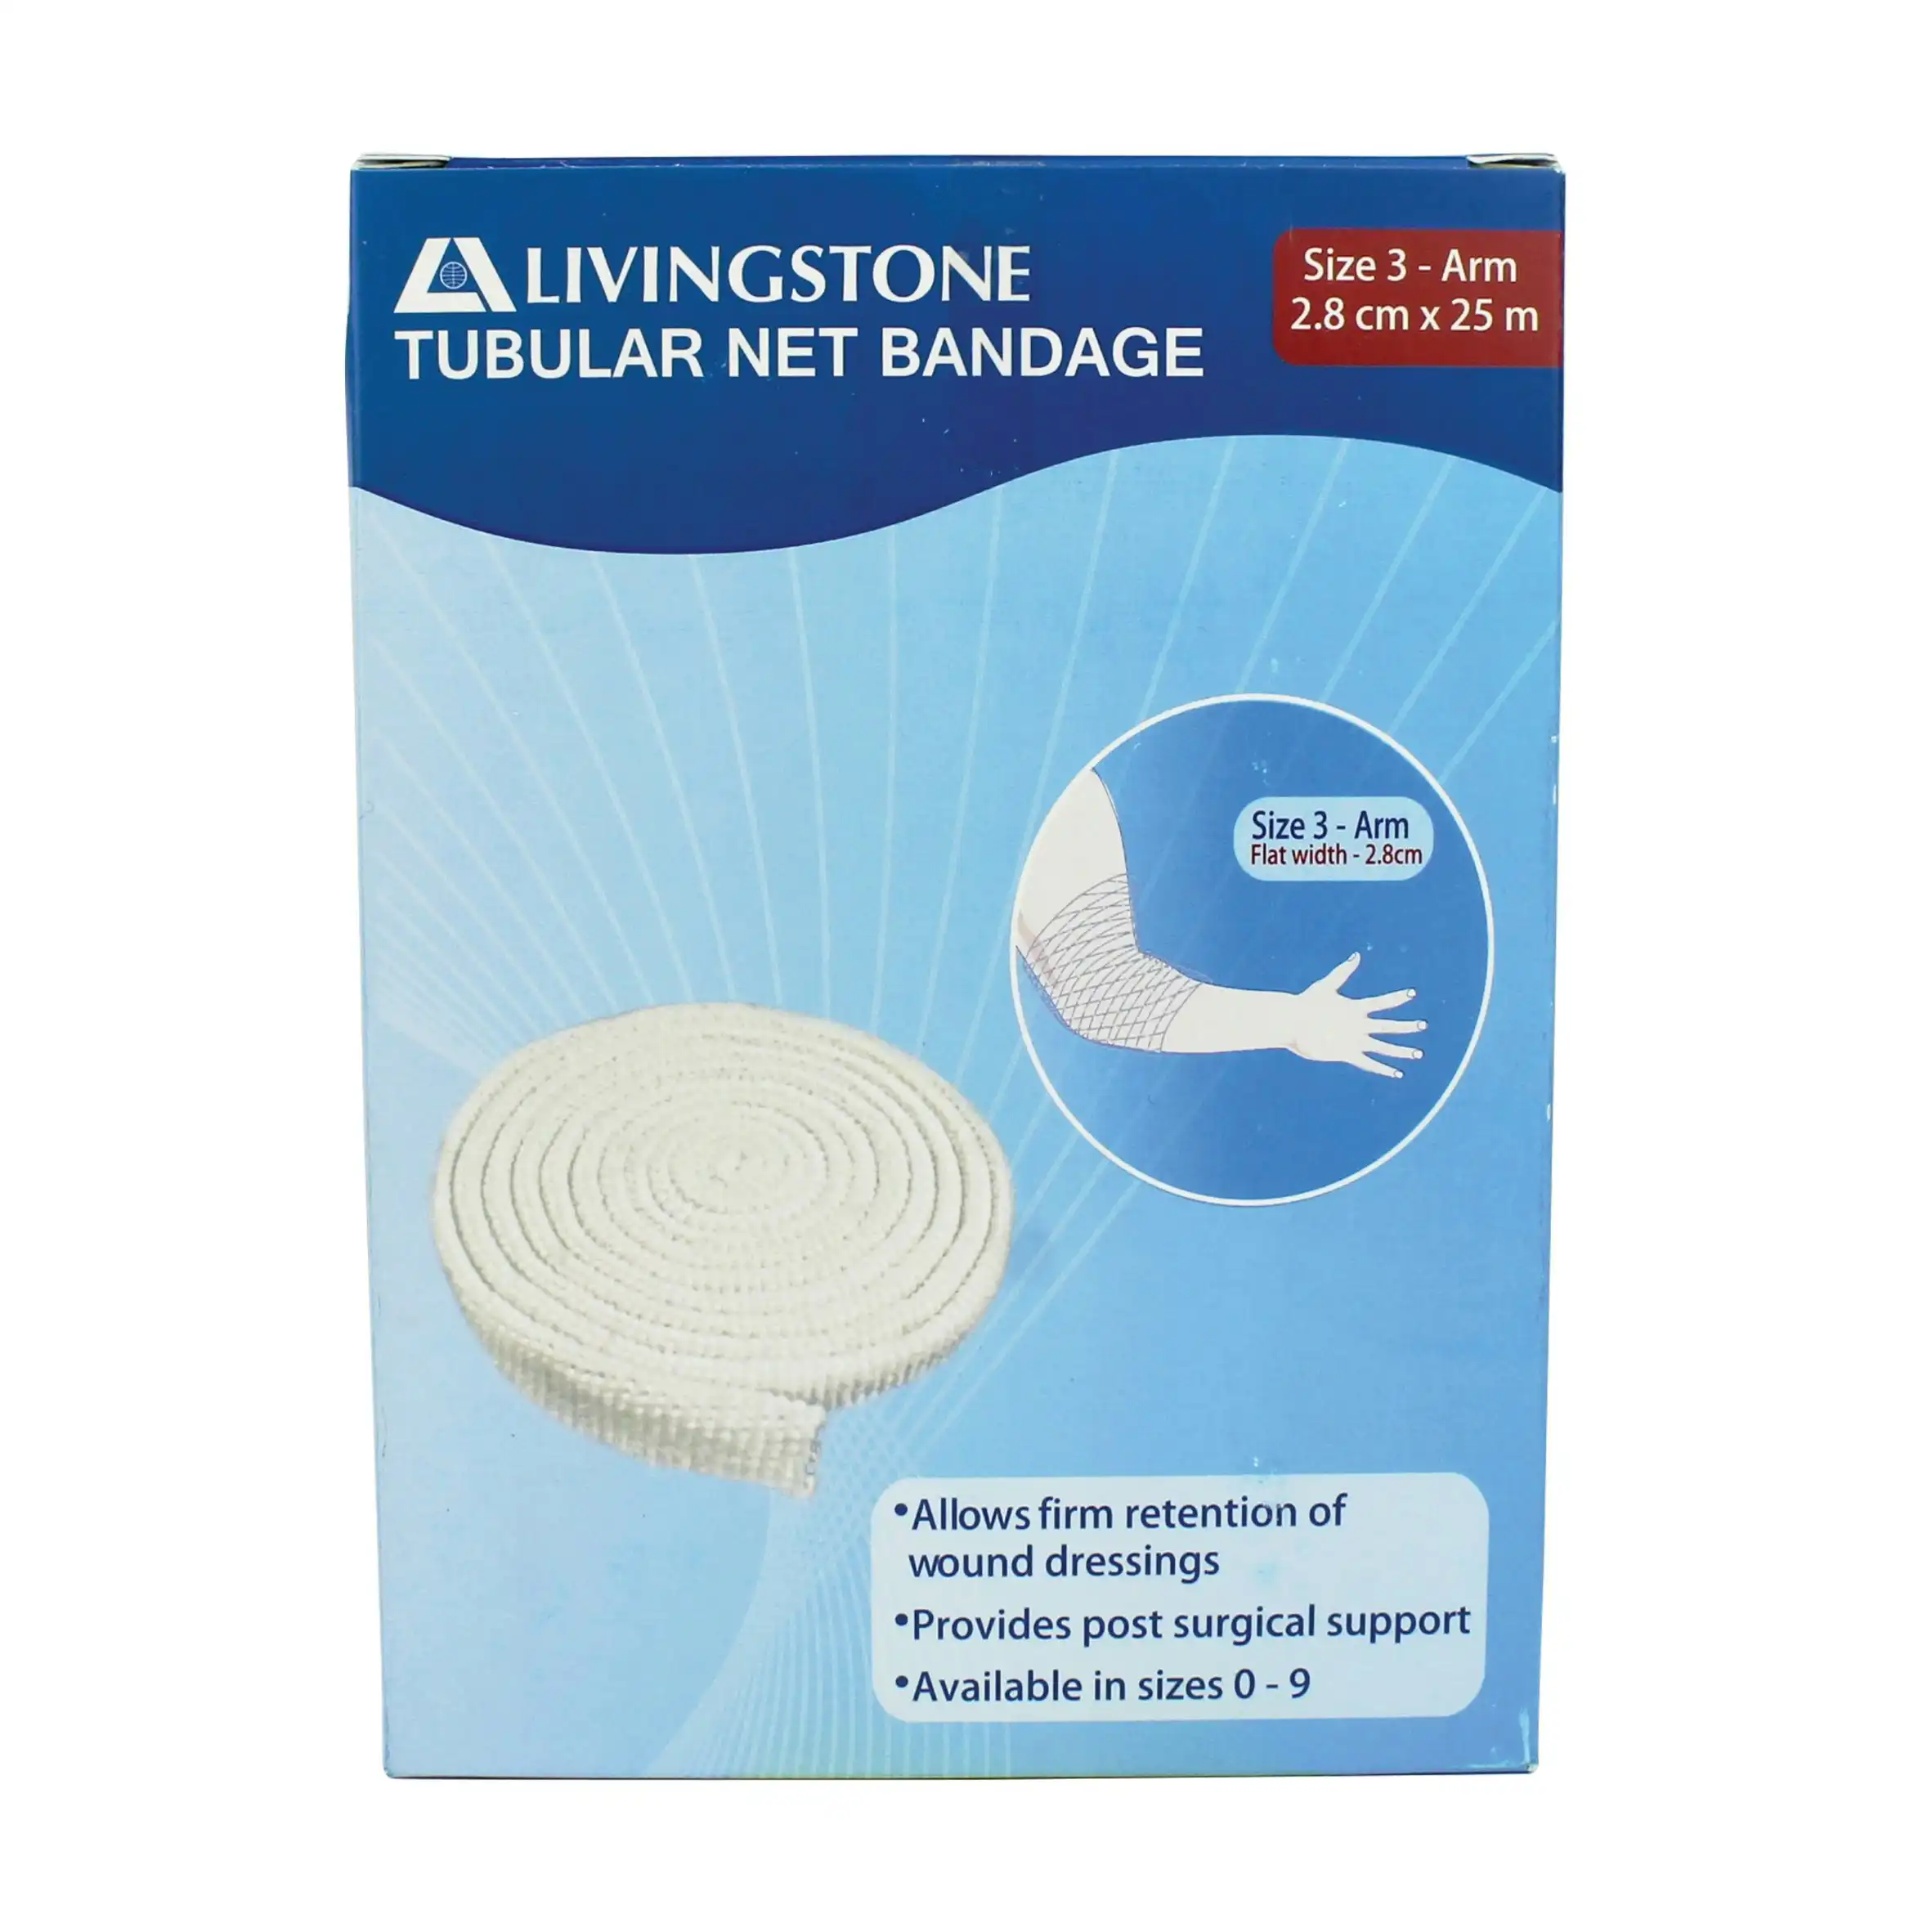 Livingstone Tubular Net Bandage Size D No. 3 Arm/Elbow Flat Width 28mm 7.5m (unstretched) 25m (stretched)